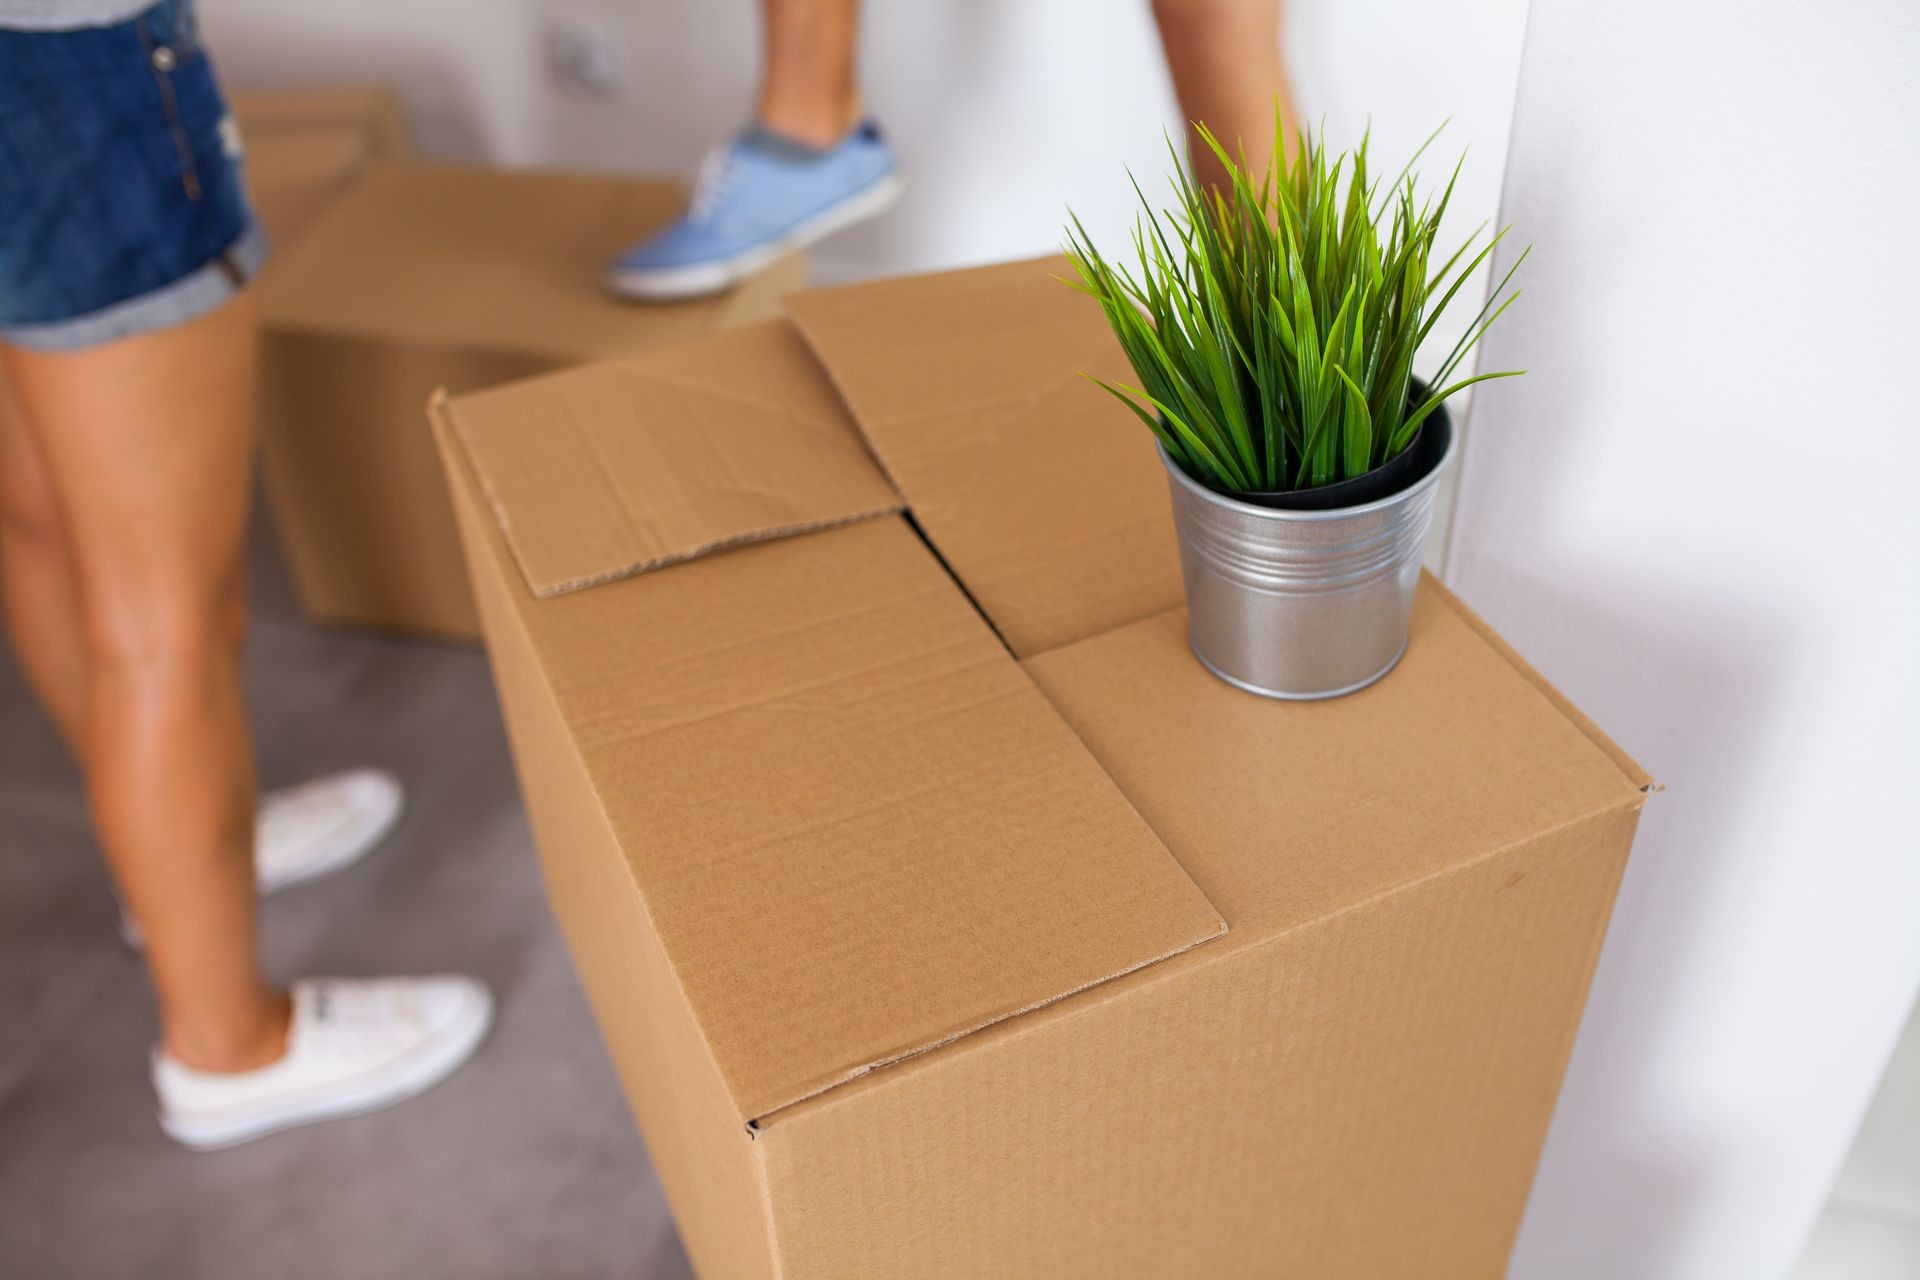 Moving box with a plant on it. Time to unpack. Close up